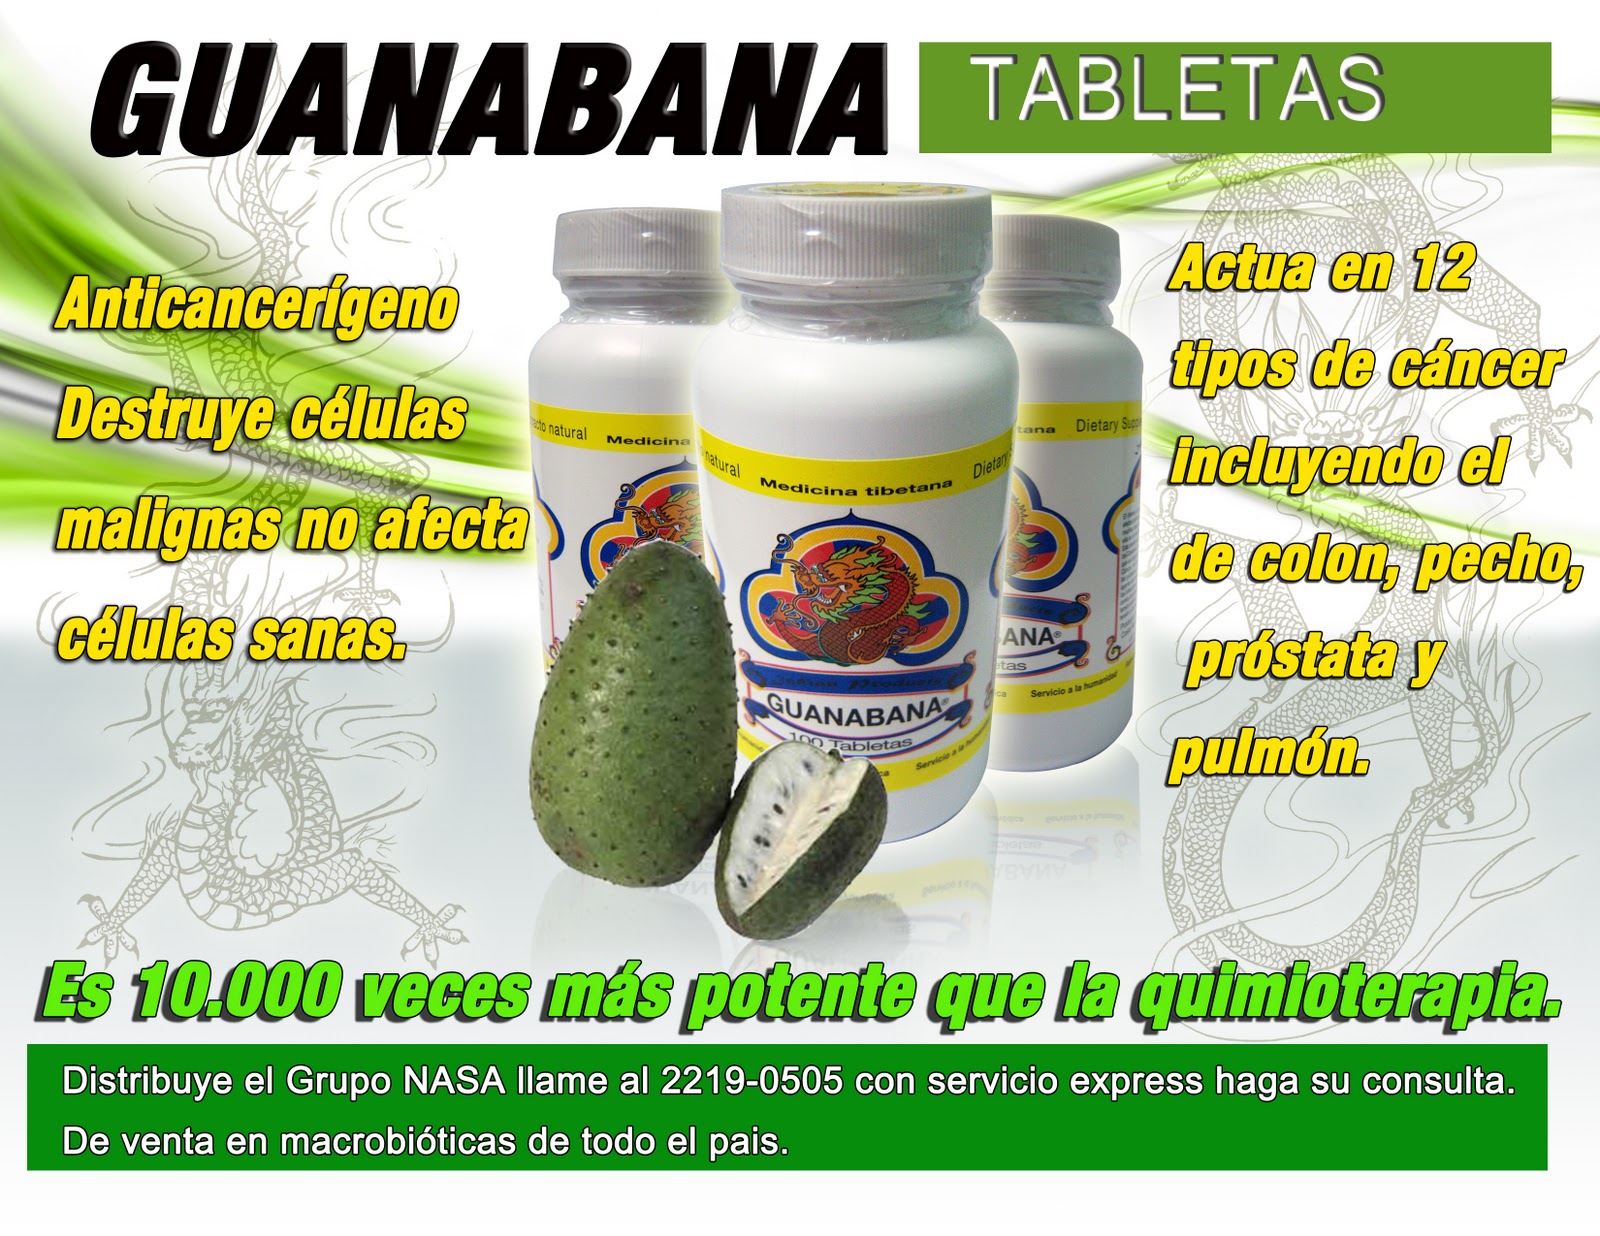 What is the relationship of guanabana and cancer?